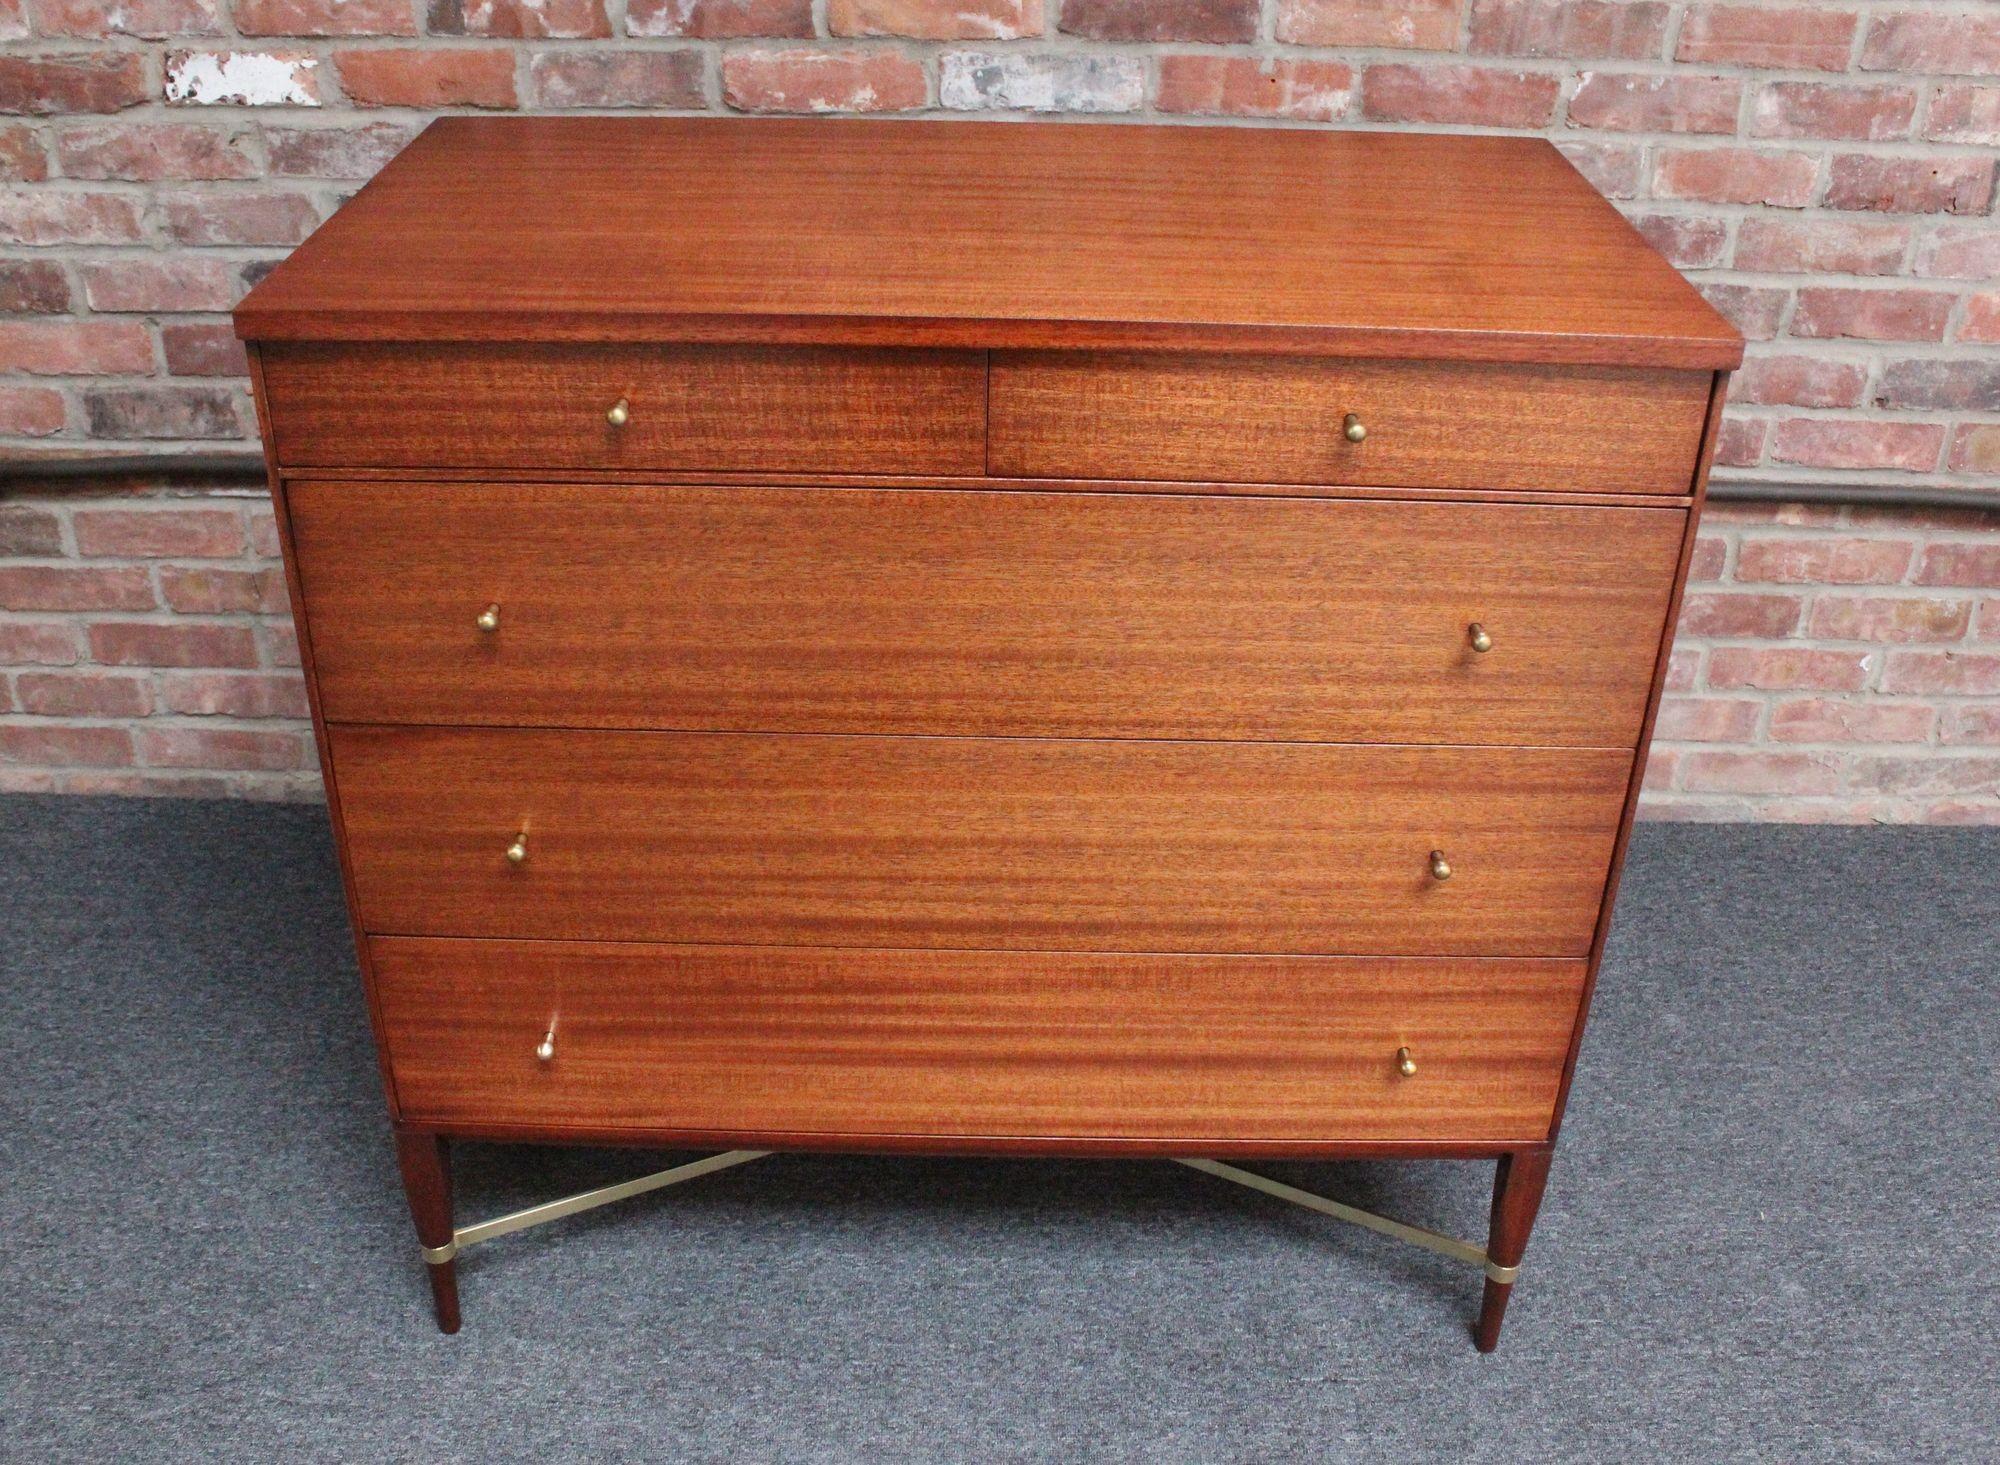 Paul Mccobb Calvin Group five-drawer chest (model 1003) manufactured by Directional Furniture (ca. early 1950s, USA).
Composed of a stained mahogany chest with brass tear-drop pulls supported by carved, tapered legs and brass 'x' stretchers.